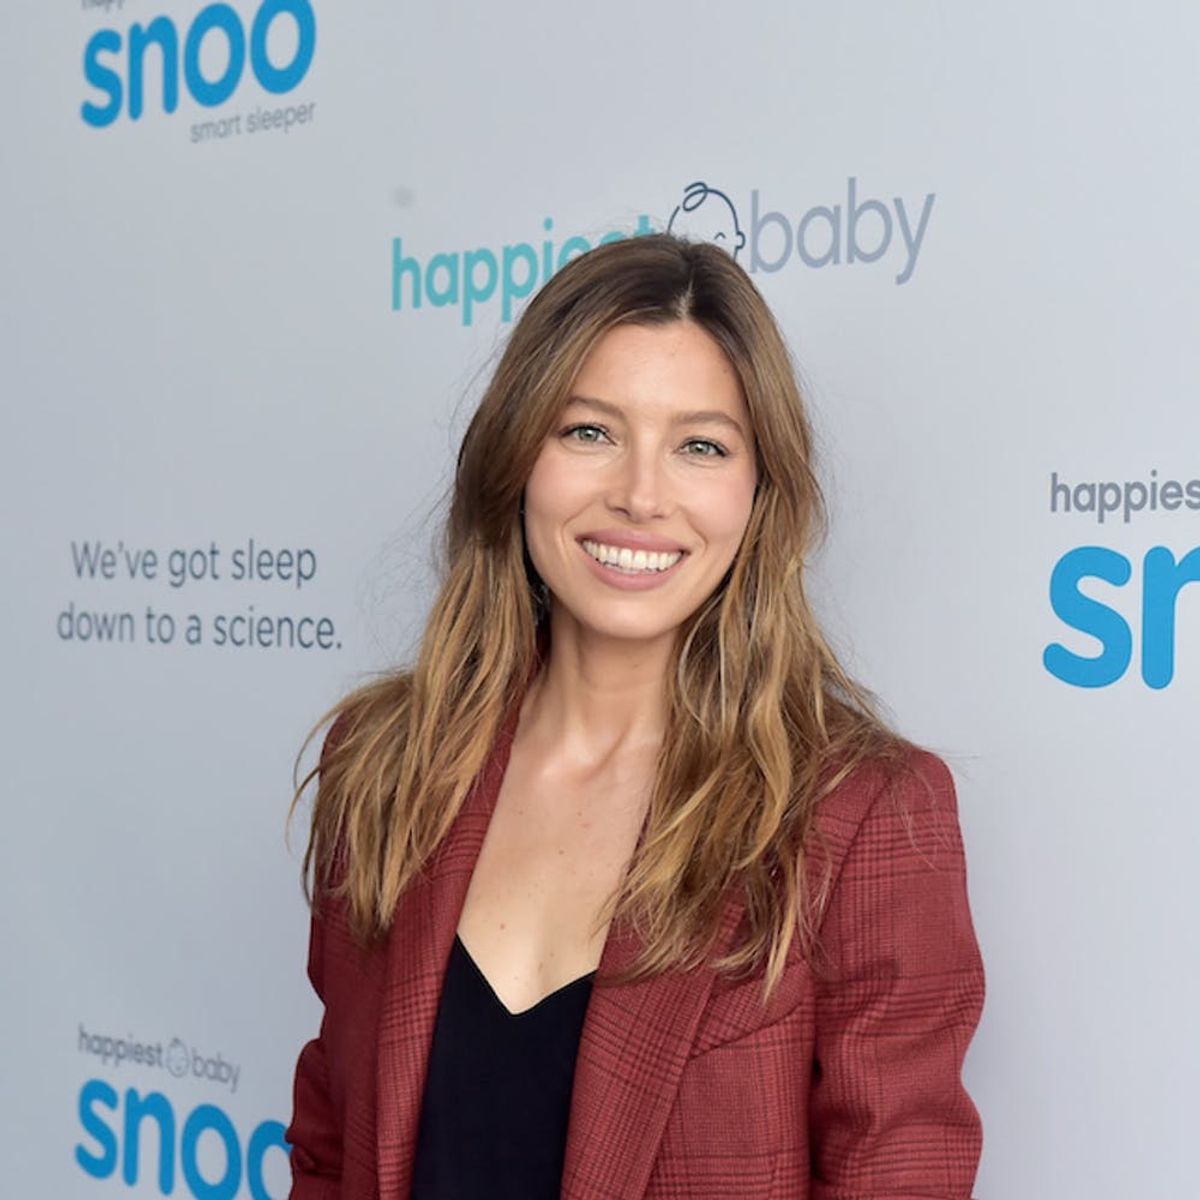 Jessica Biel on How to Get More Sleep as a New Parent